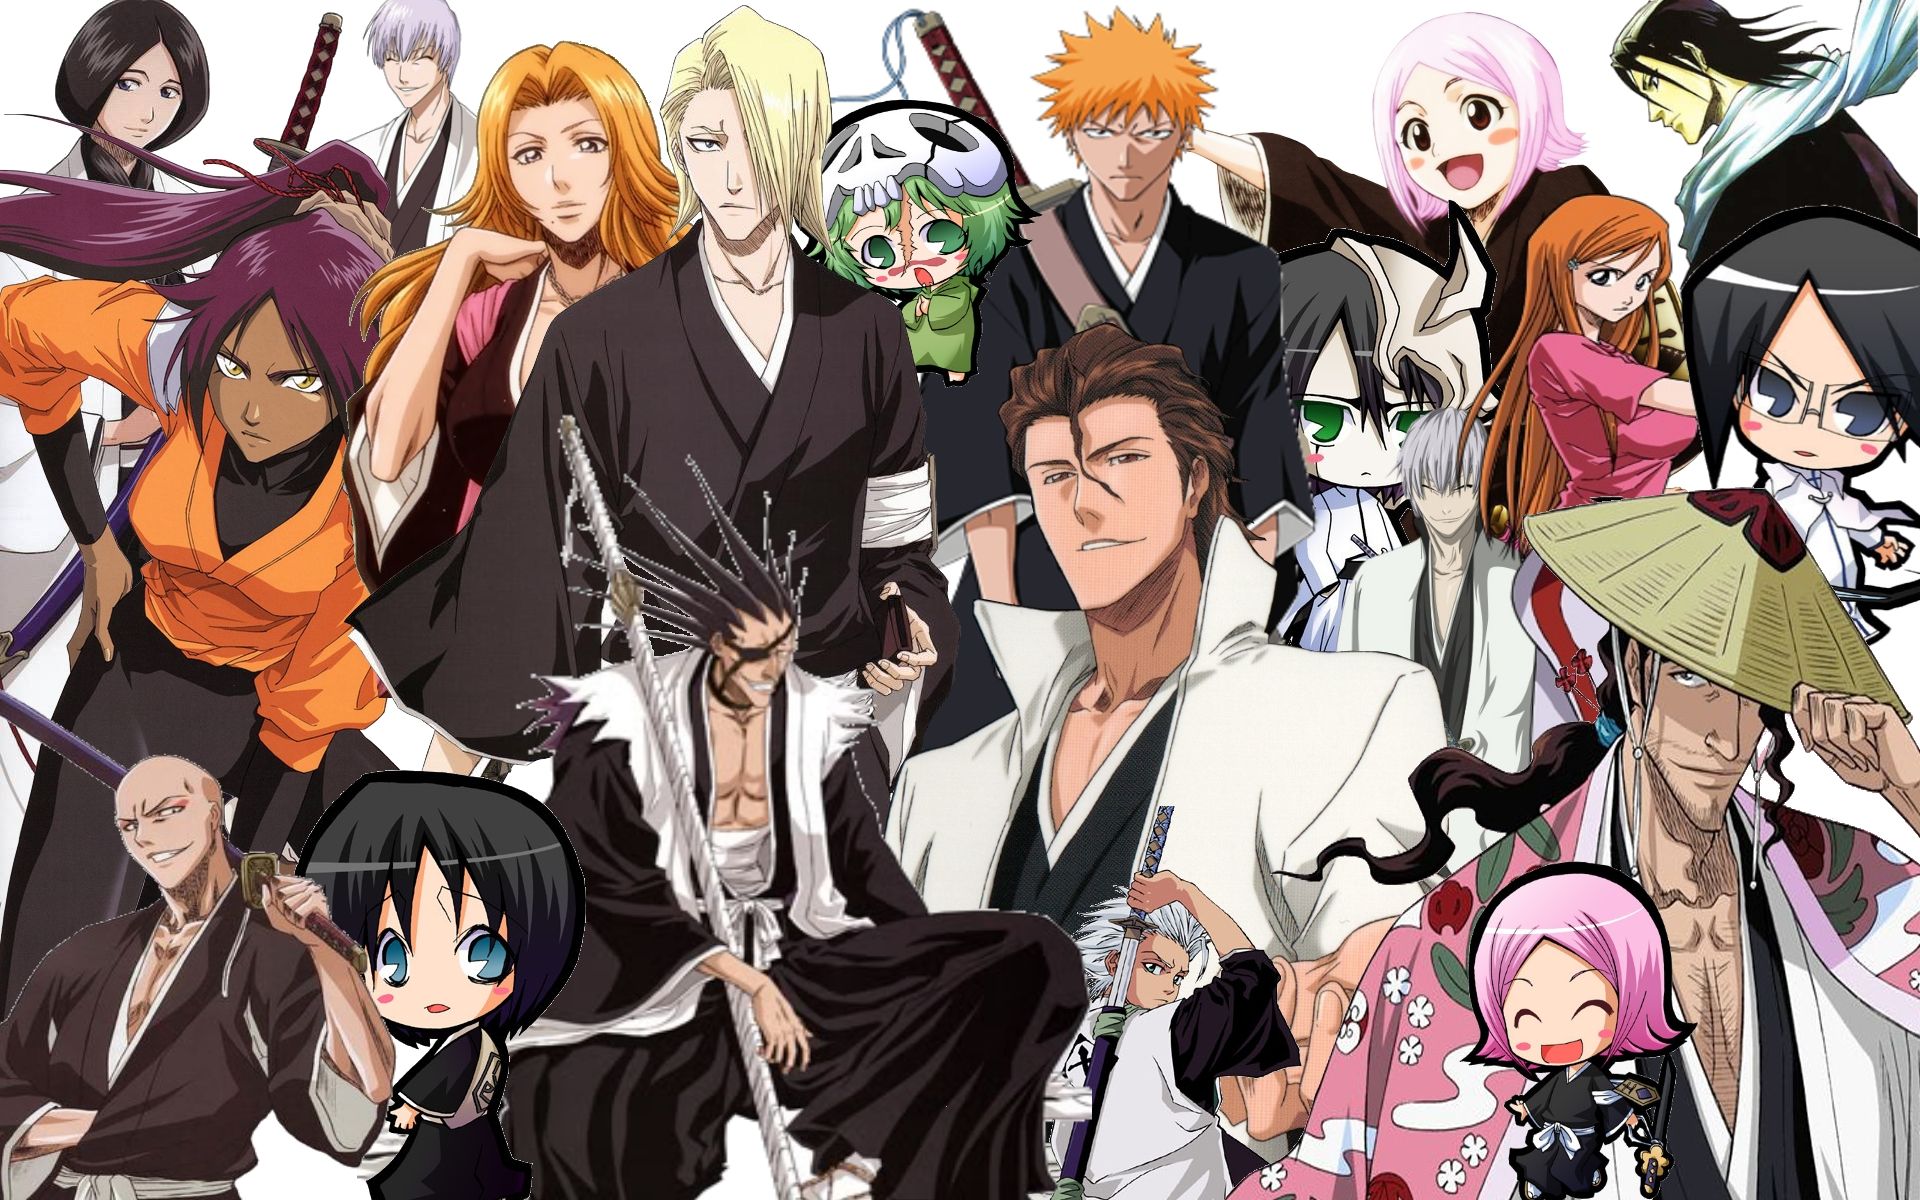 Bleach Collage-Wallpaper 2 by superzproductions on DeviantArt